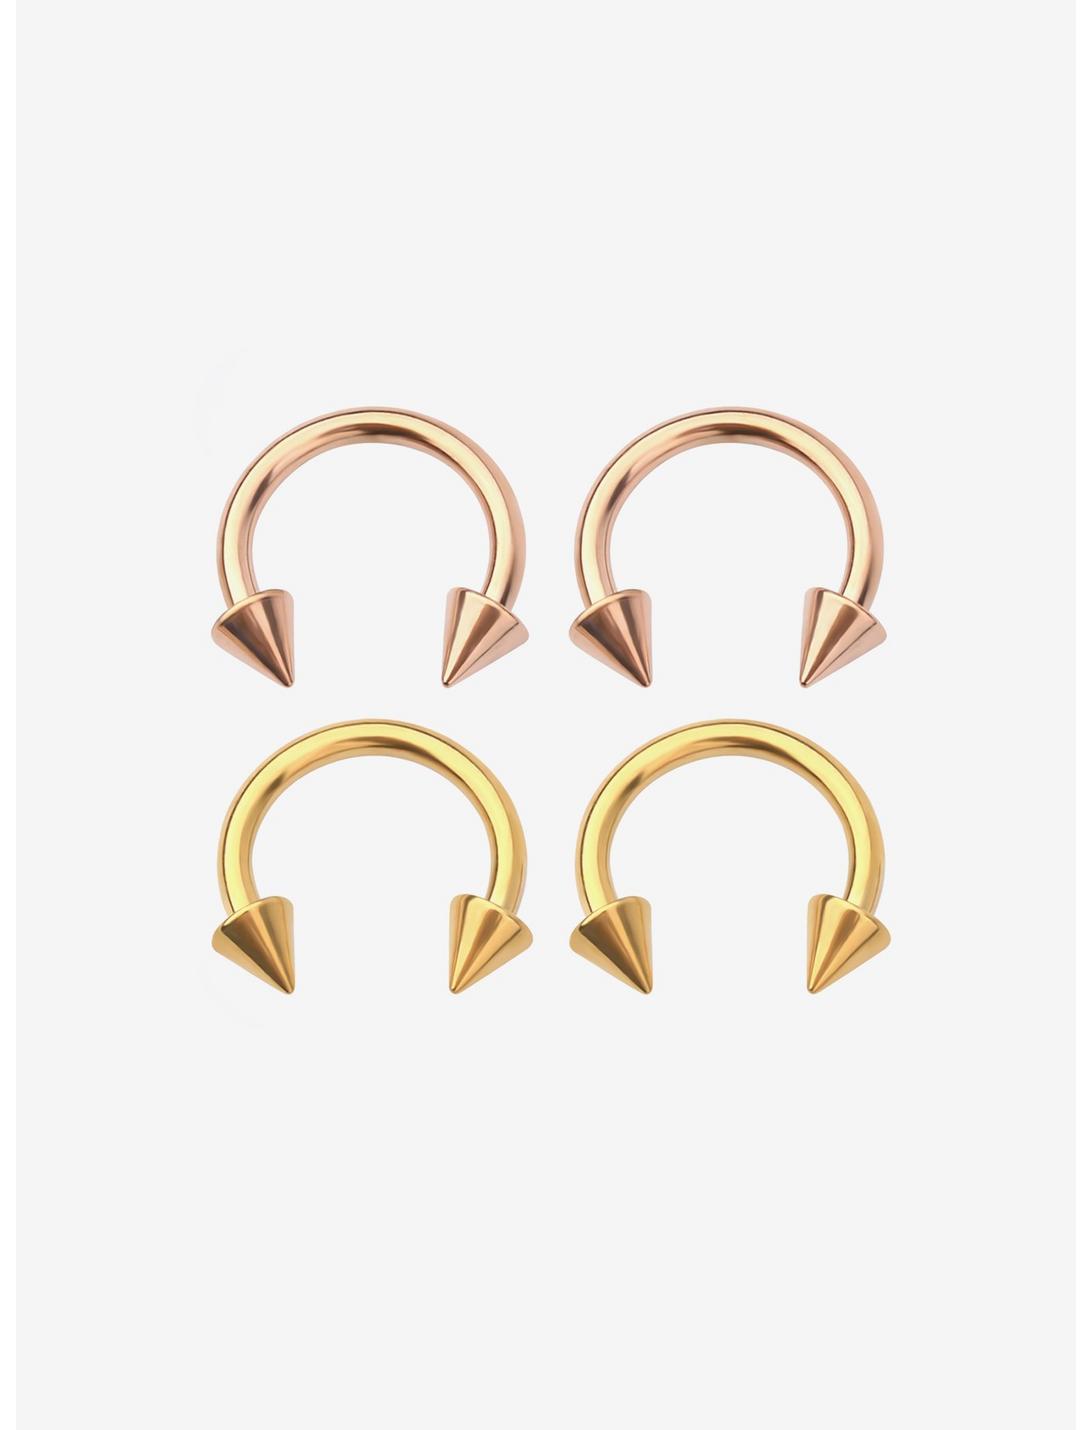 Steel Gold & Rose Gold Spike Circular Barbell 4 Pack, SILVER, hi-res